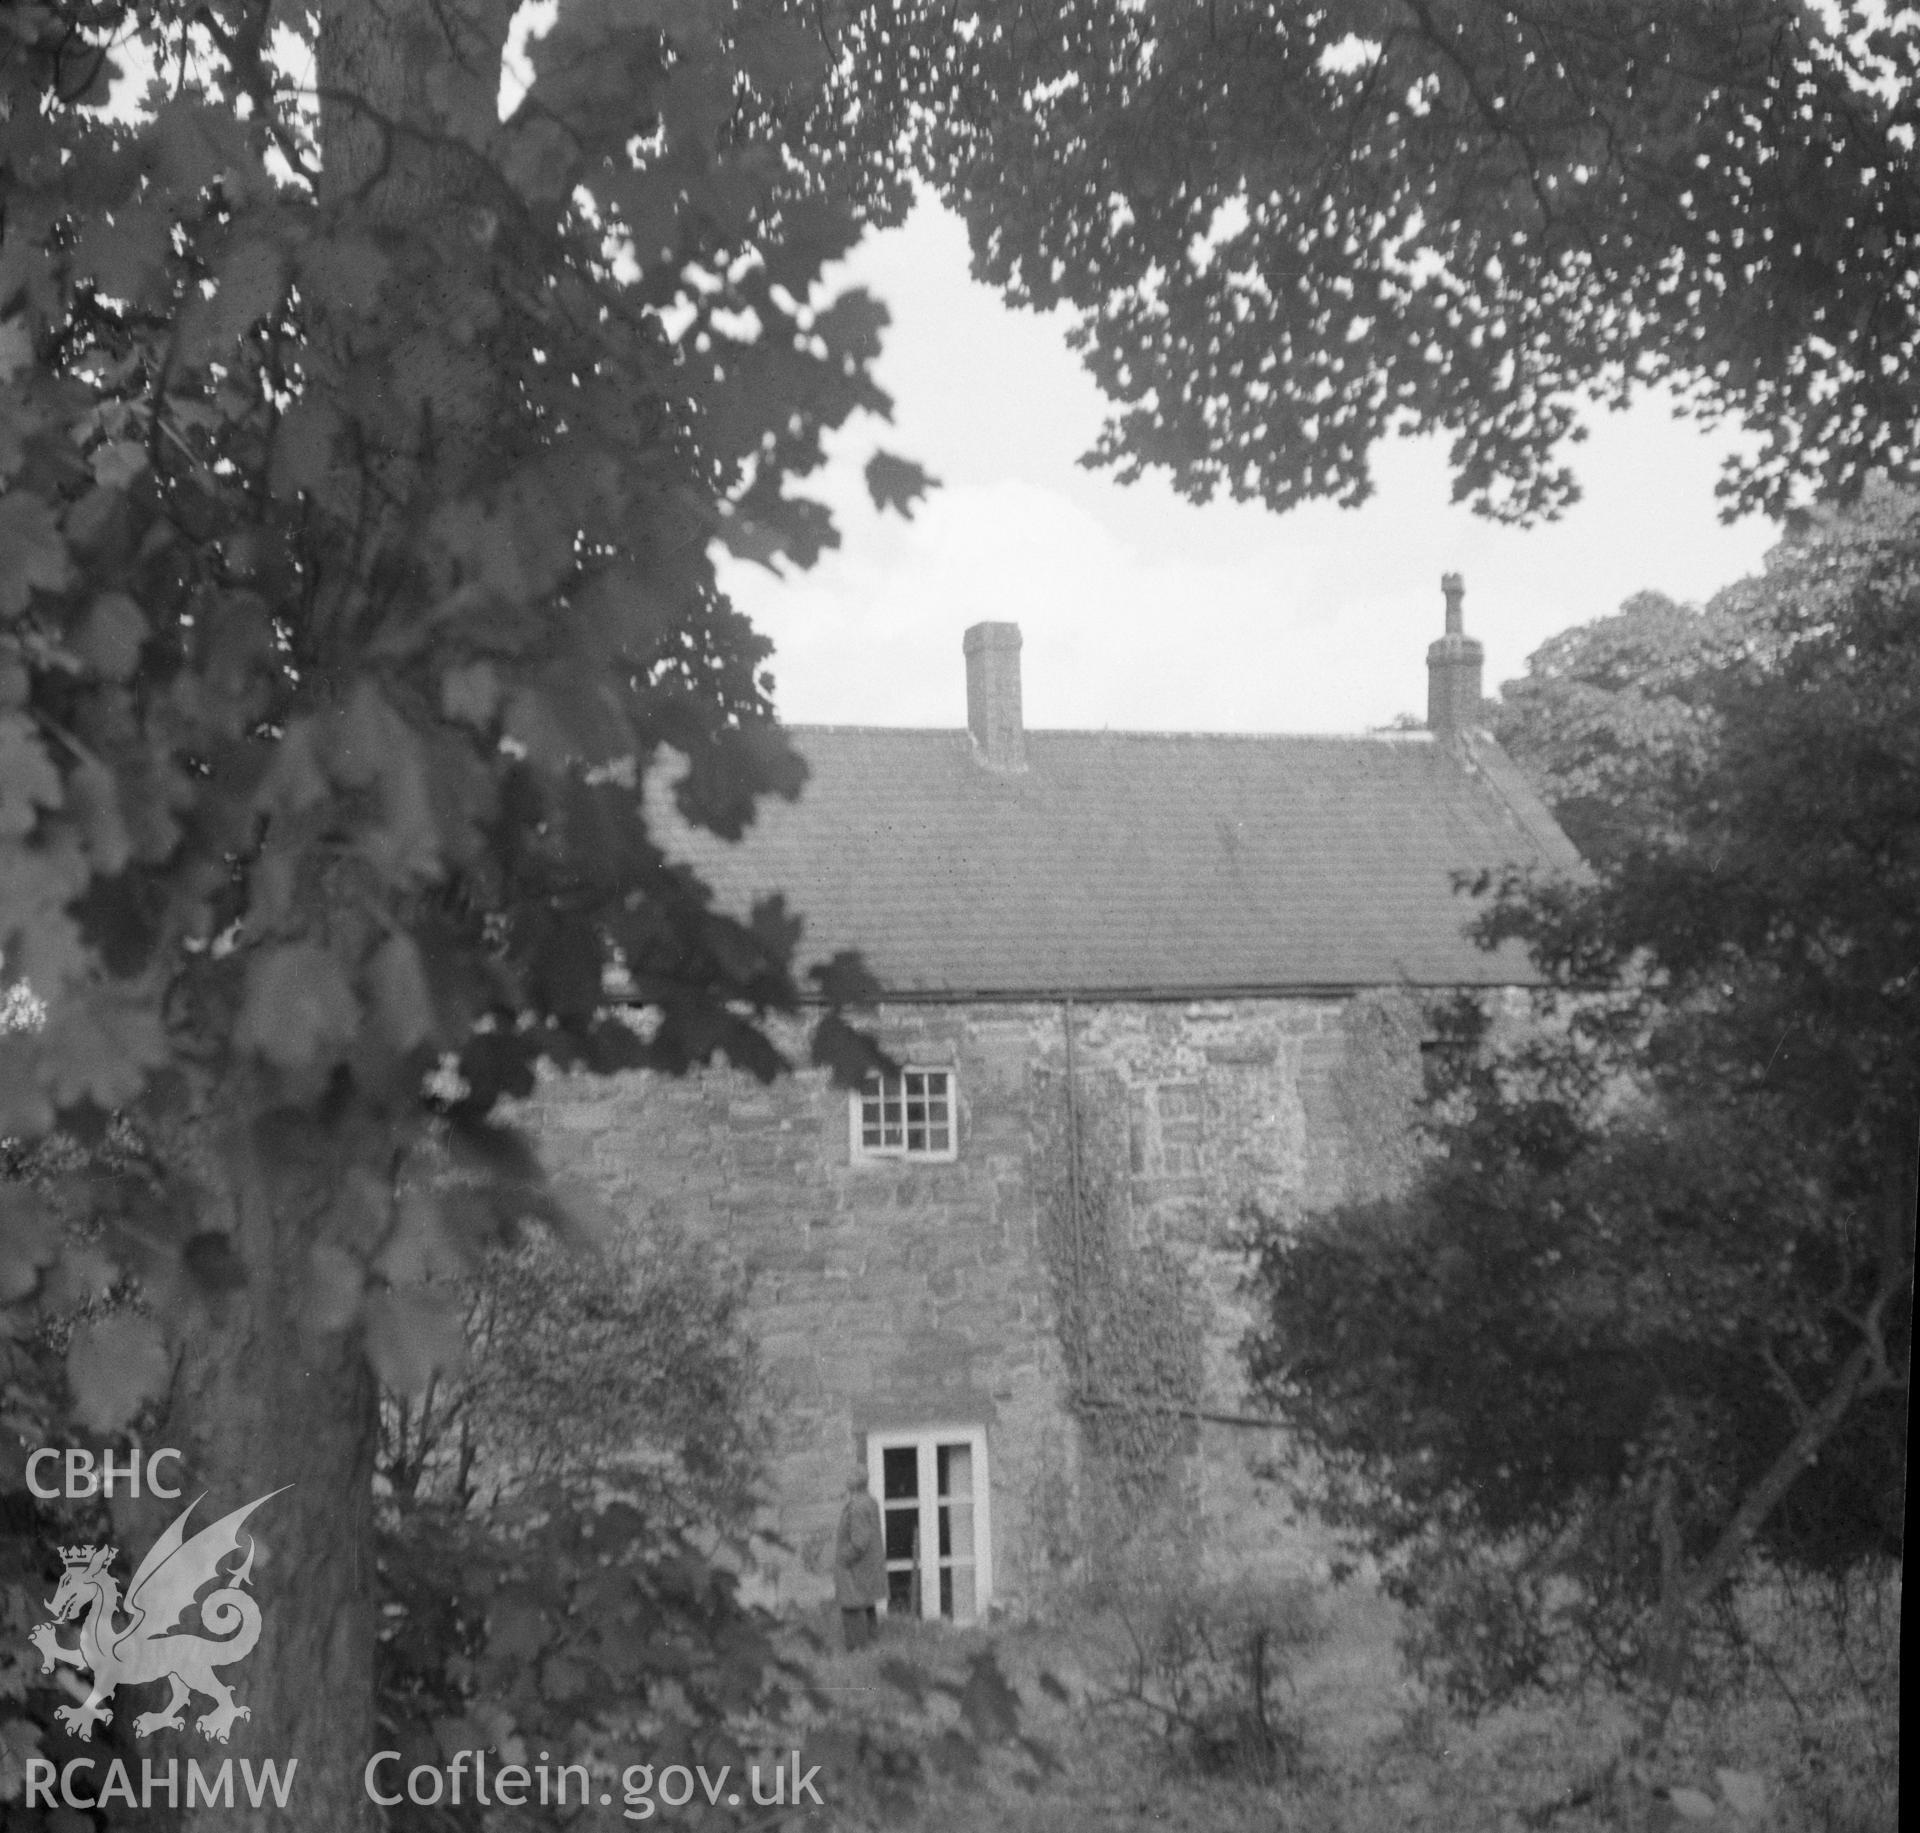 Digital copy of a black and white nitrate negative showing exterior view of Llyseurgain, Northop.